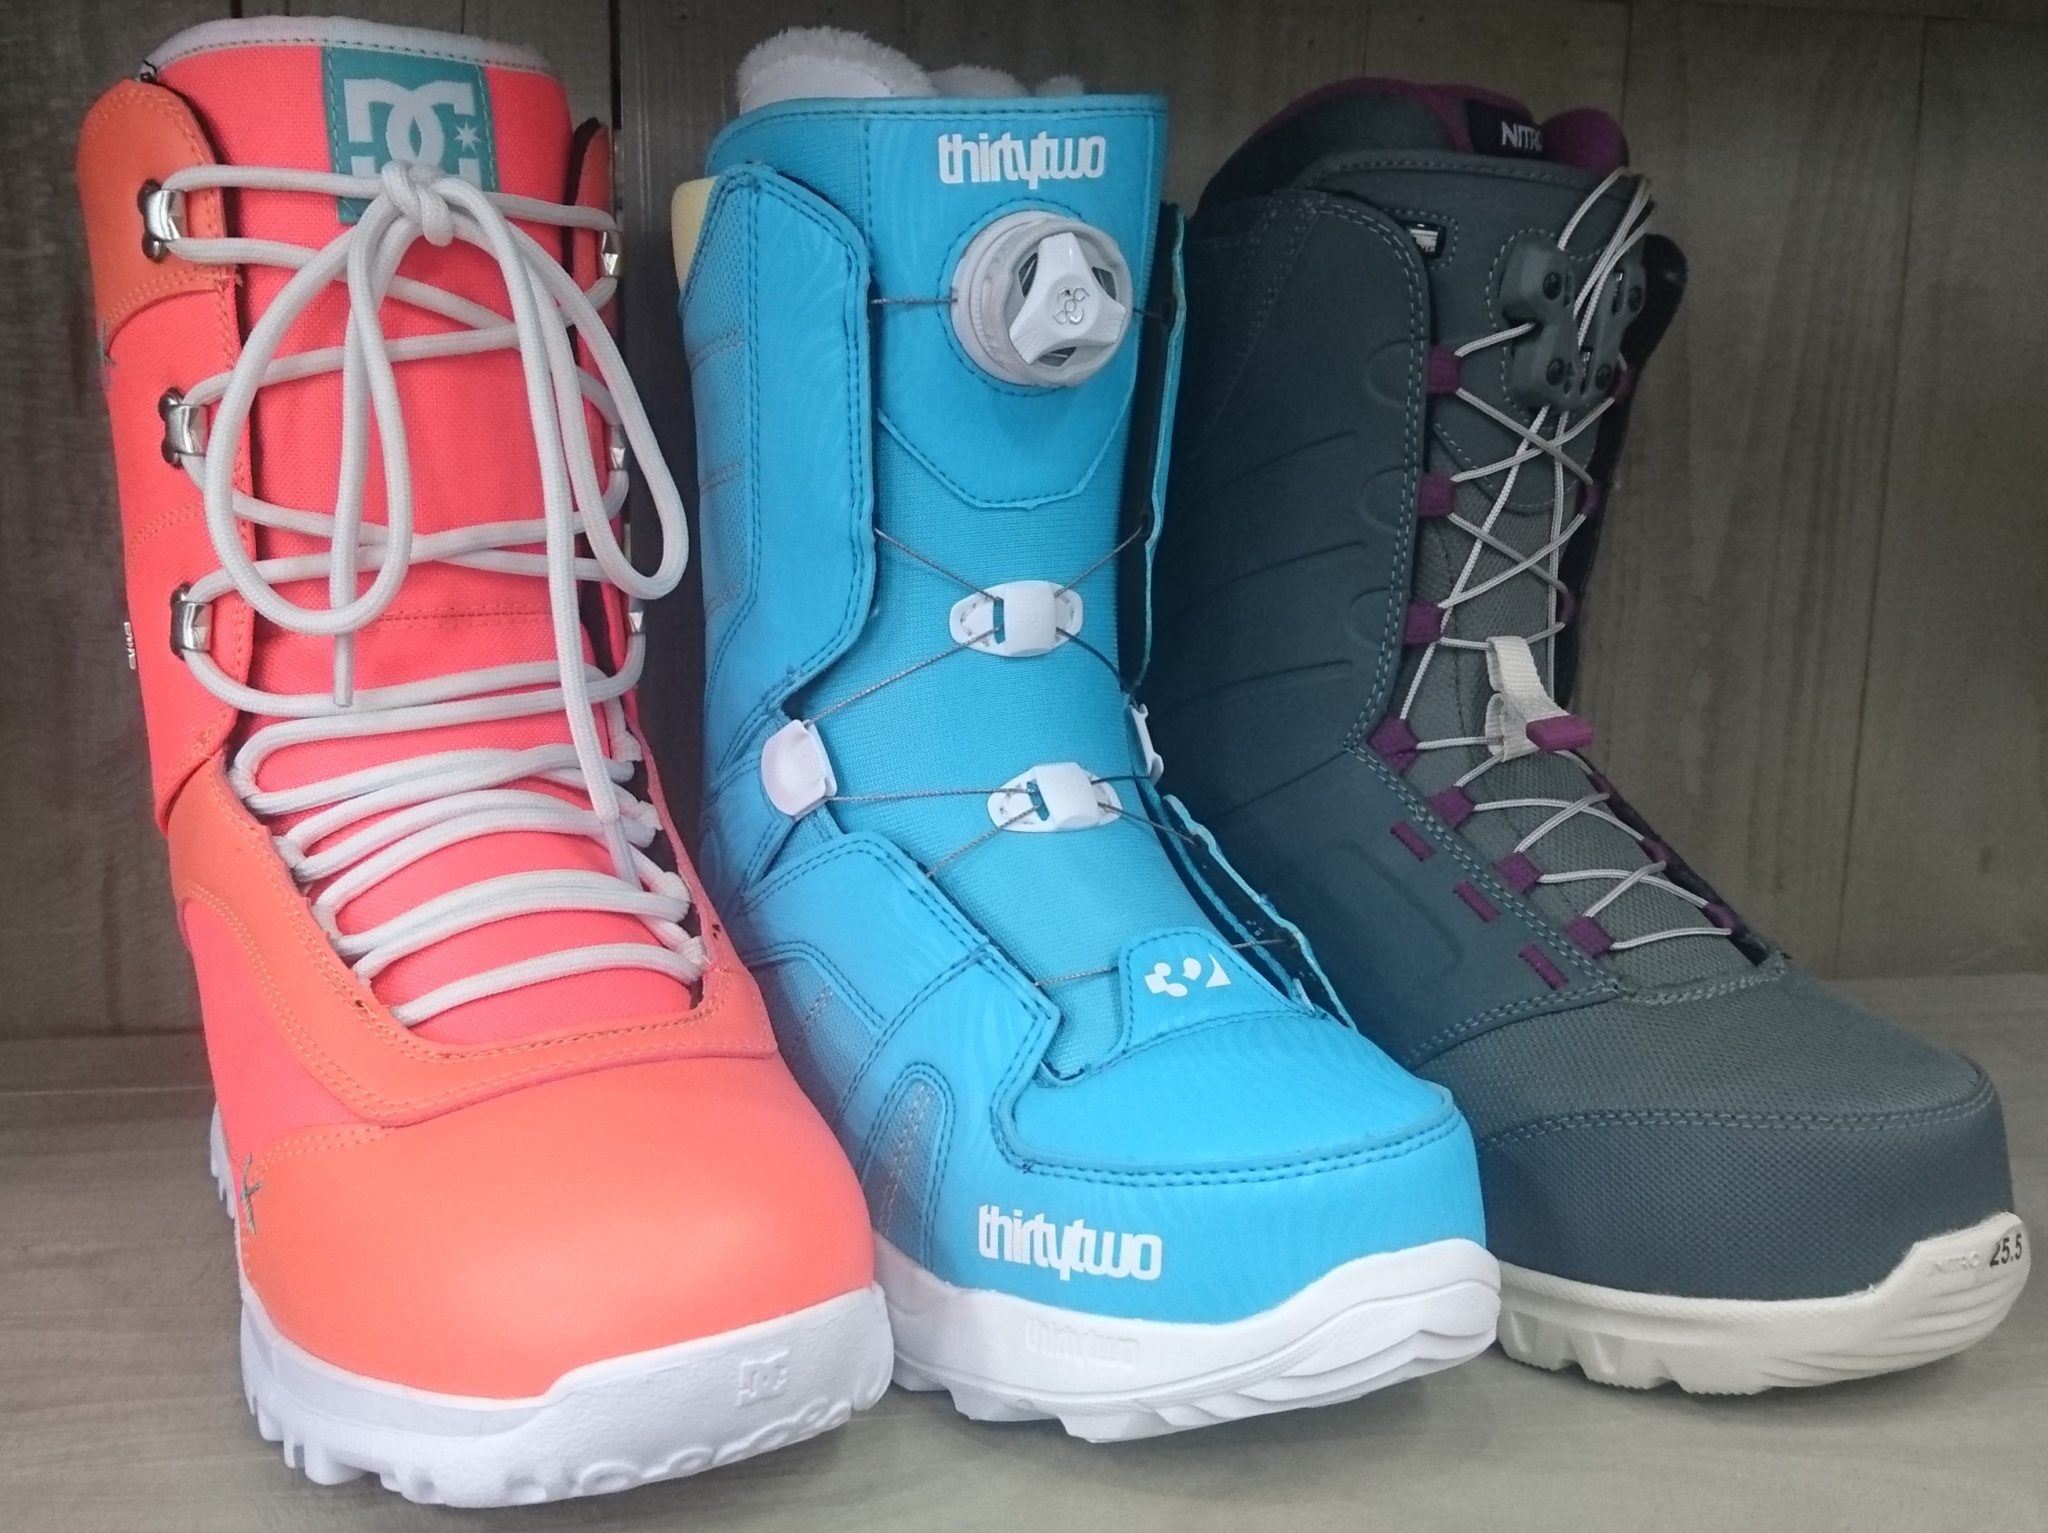 Buy > most expensive snowboard boots > in stock